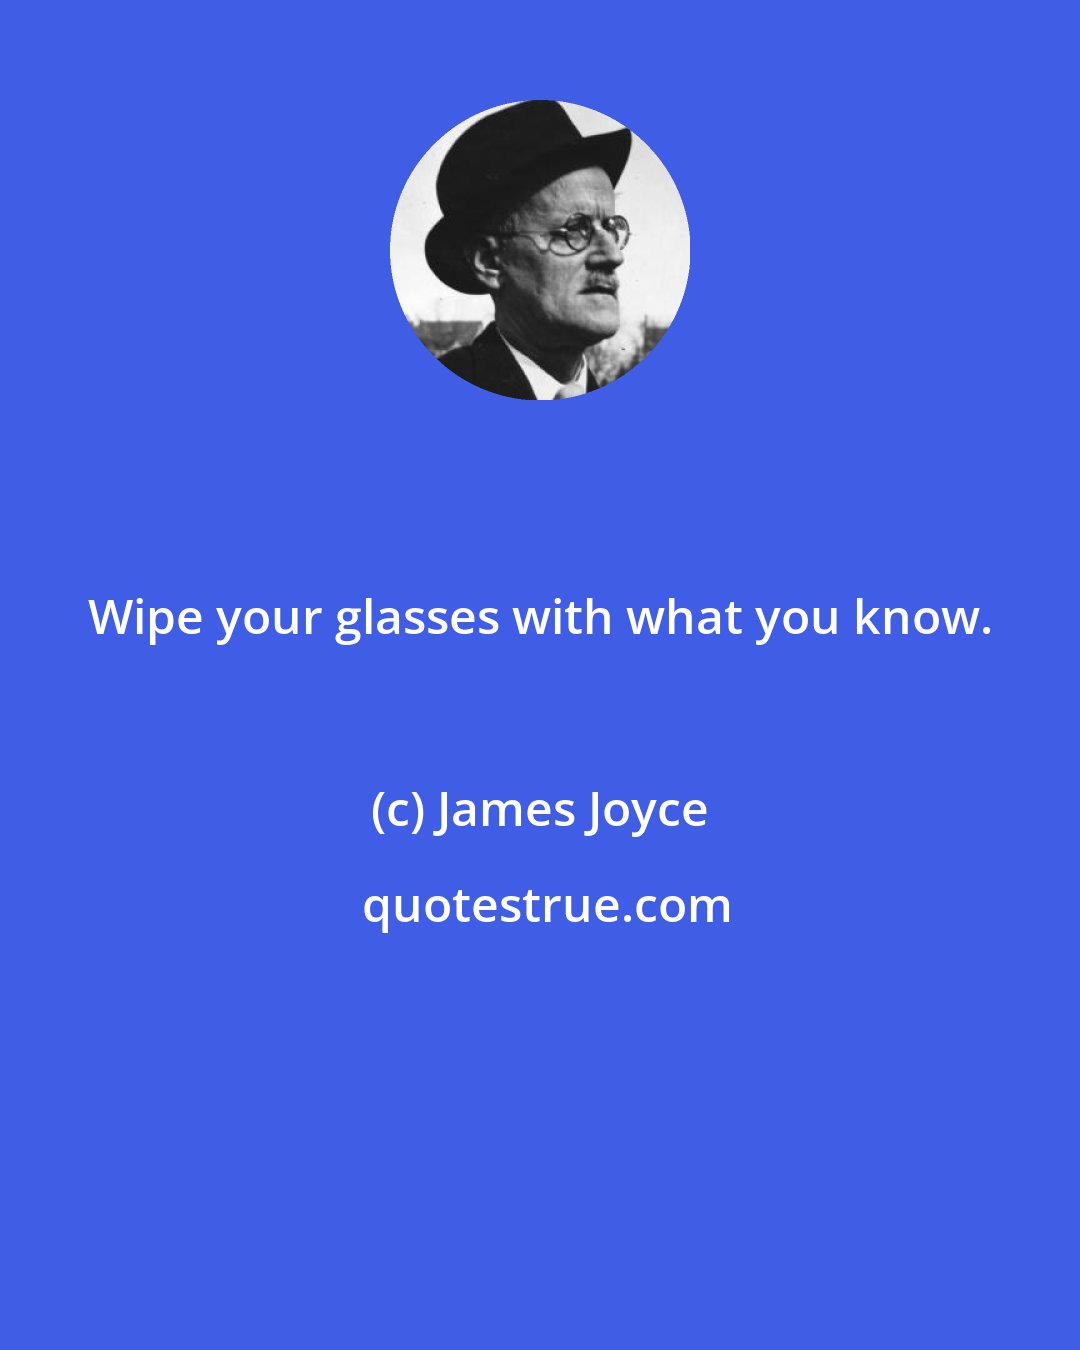 James Joyce: Wipe your glasses with what you know.